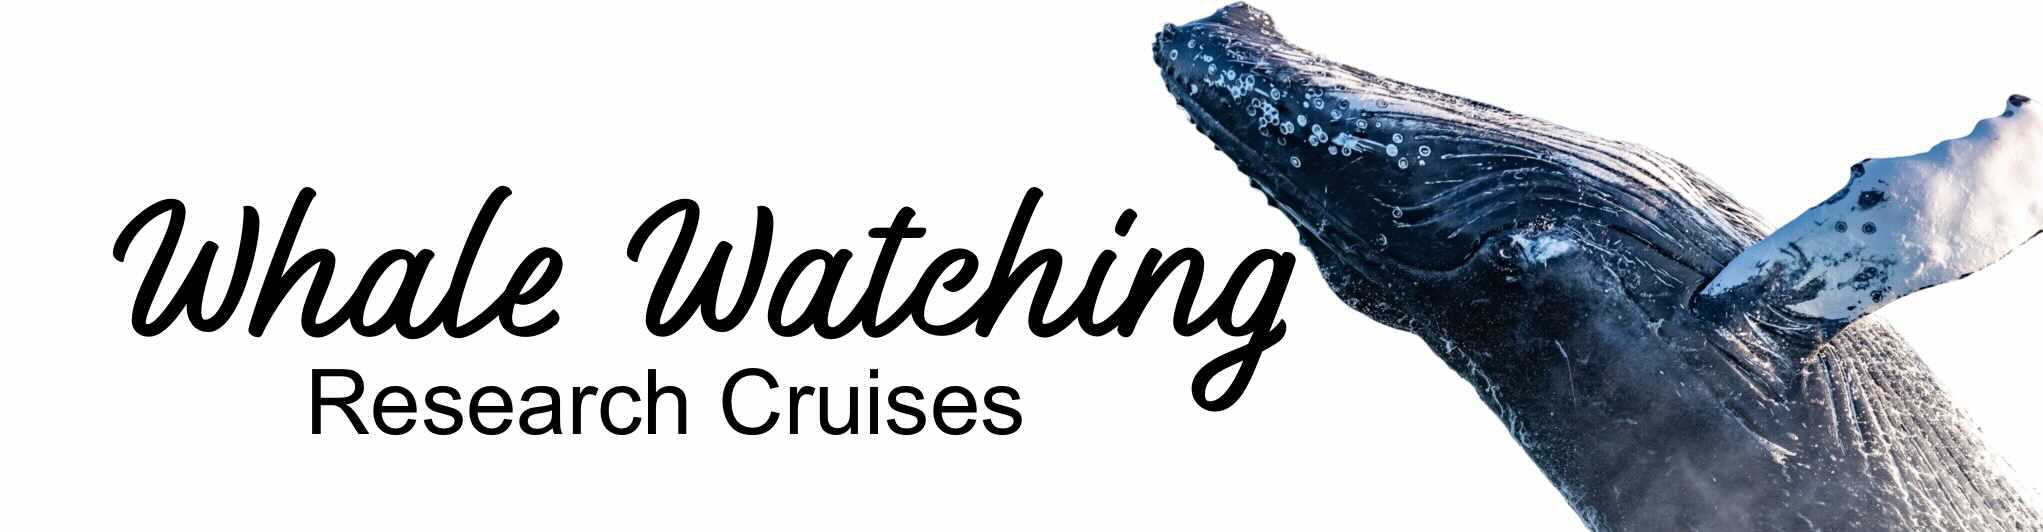 A picture of the logo for watching cruises.